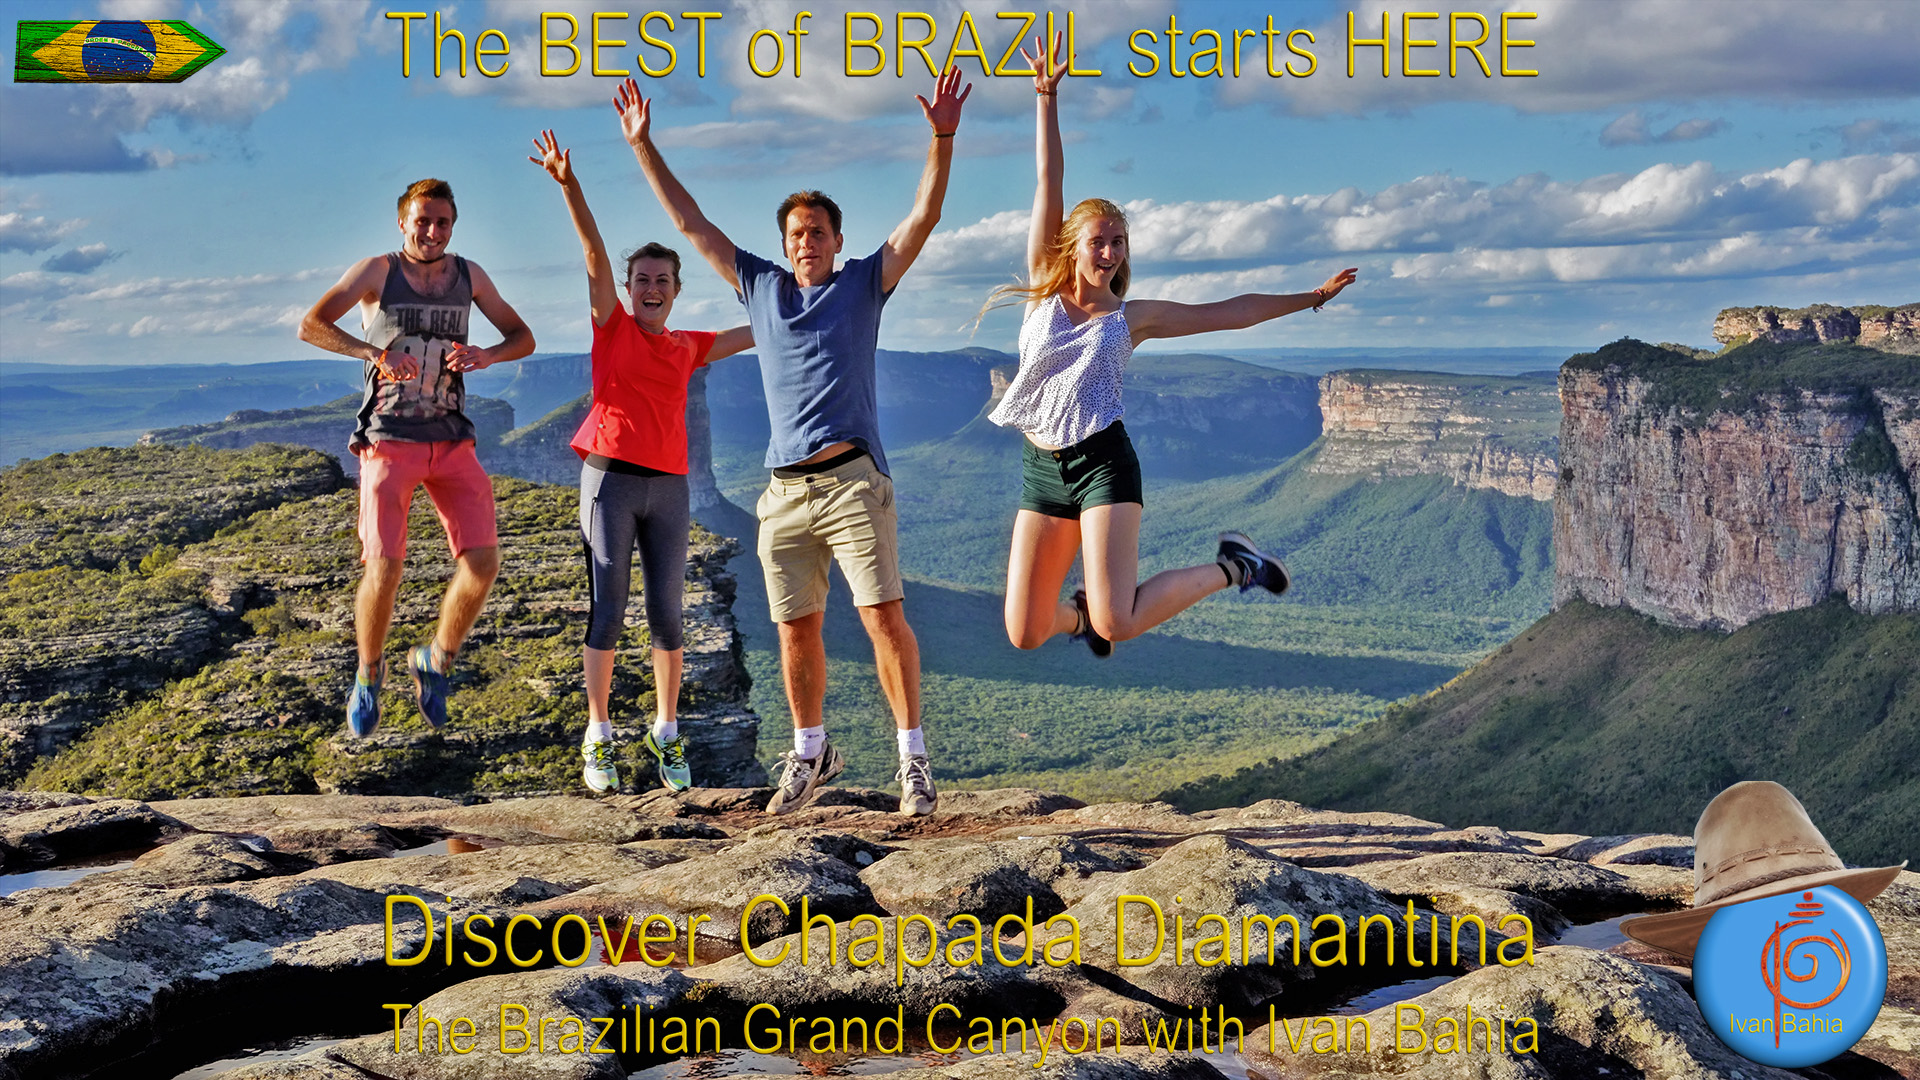 Discover Bahia with Ivan Bahia private tour-guide / travel agency, for the best experience in Salvador, Chapada Diamantina National Park and Bahia /NE-Brazil - Photography by Ivan Bahia Guide, traveling in Brazil, reisgids in Brazilie, #BahiaMetisse,#FotosBahia,#IvanBahiaGuide,#IvanSalvadorBahia,#SalvadorBahiaTravel,#ToursByLocals,#FernandoBingreTourGuide